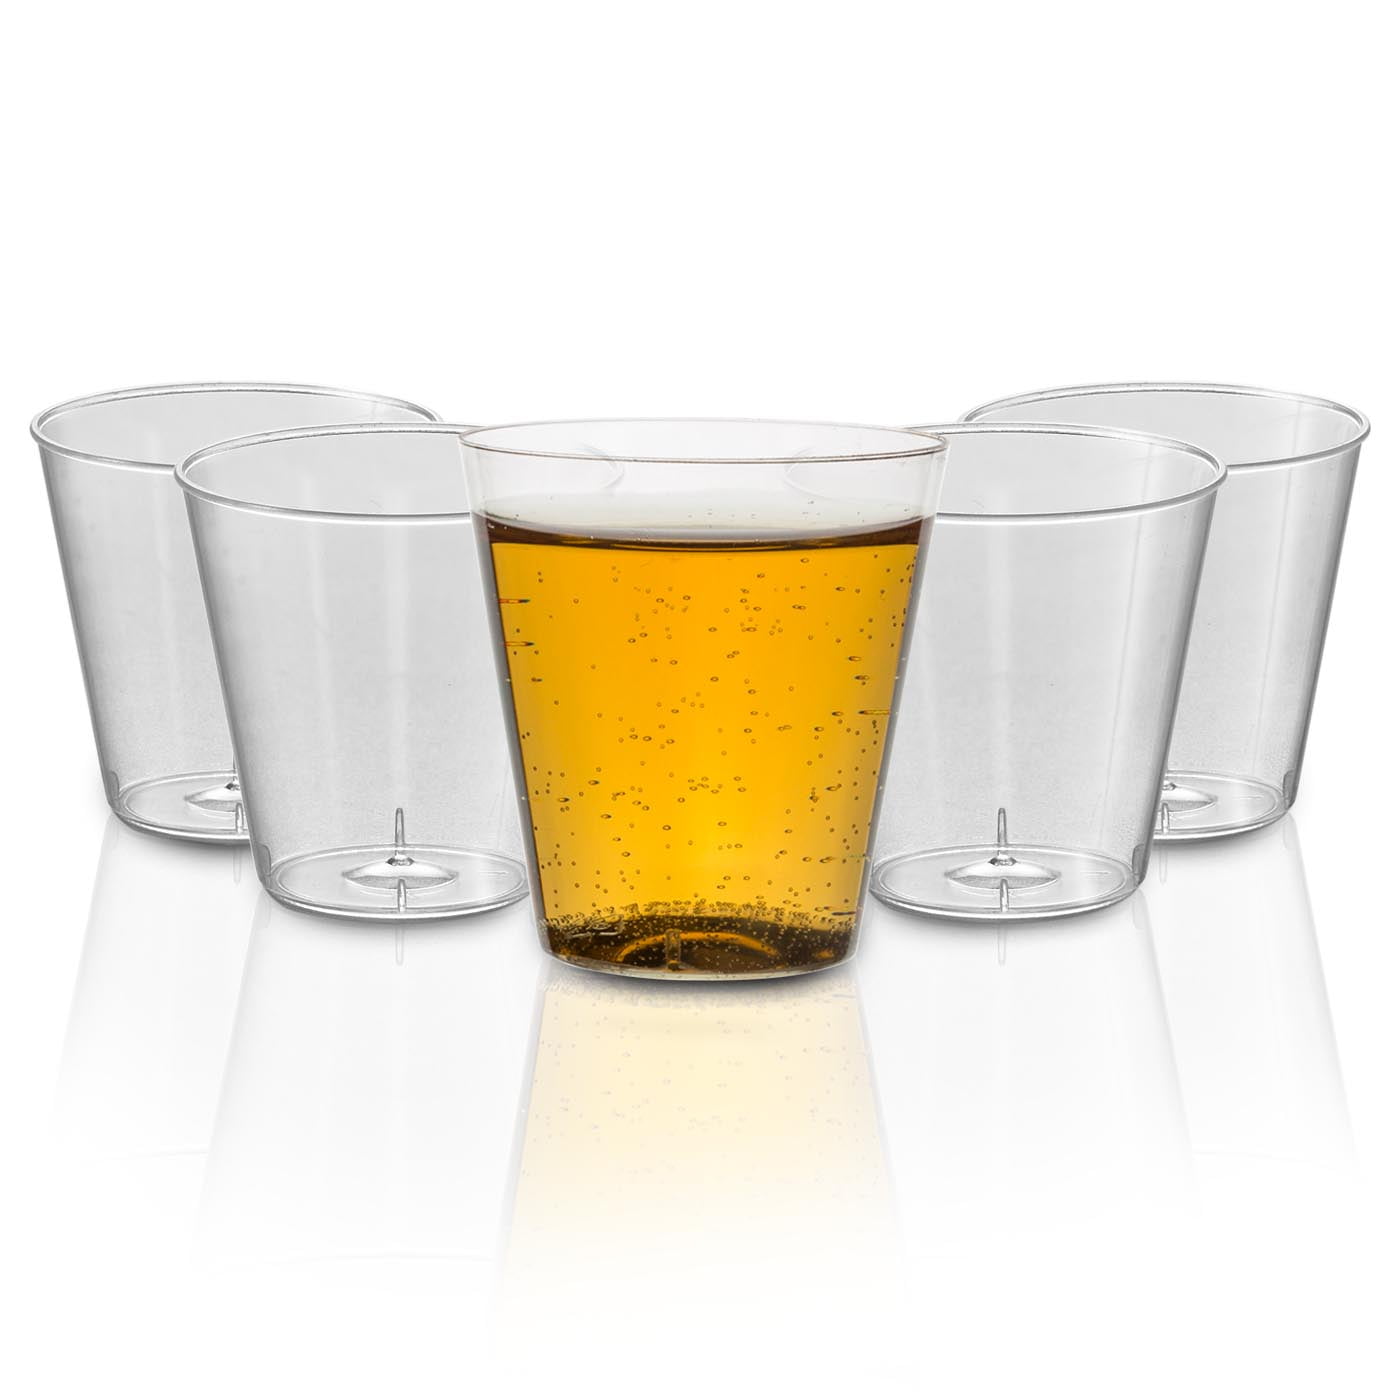 Smarty Had A Party 2 oz. Clear Square Plastic Shot Glasses (960 Glasses)